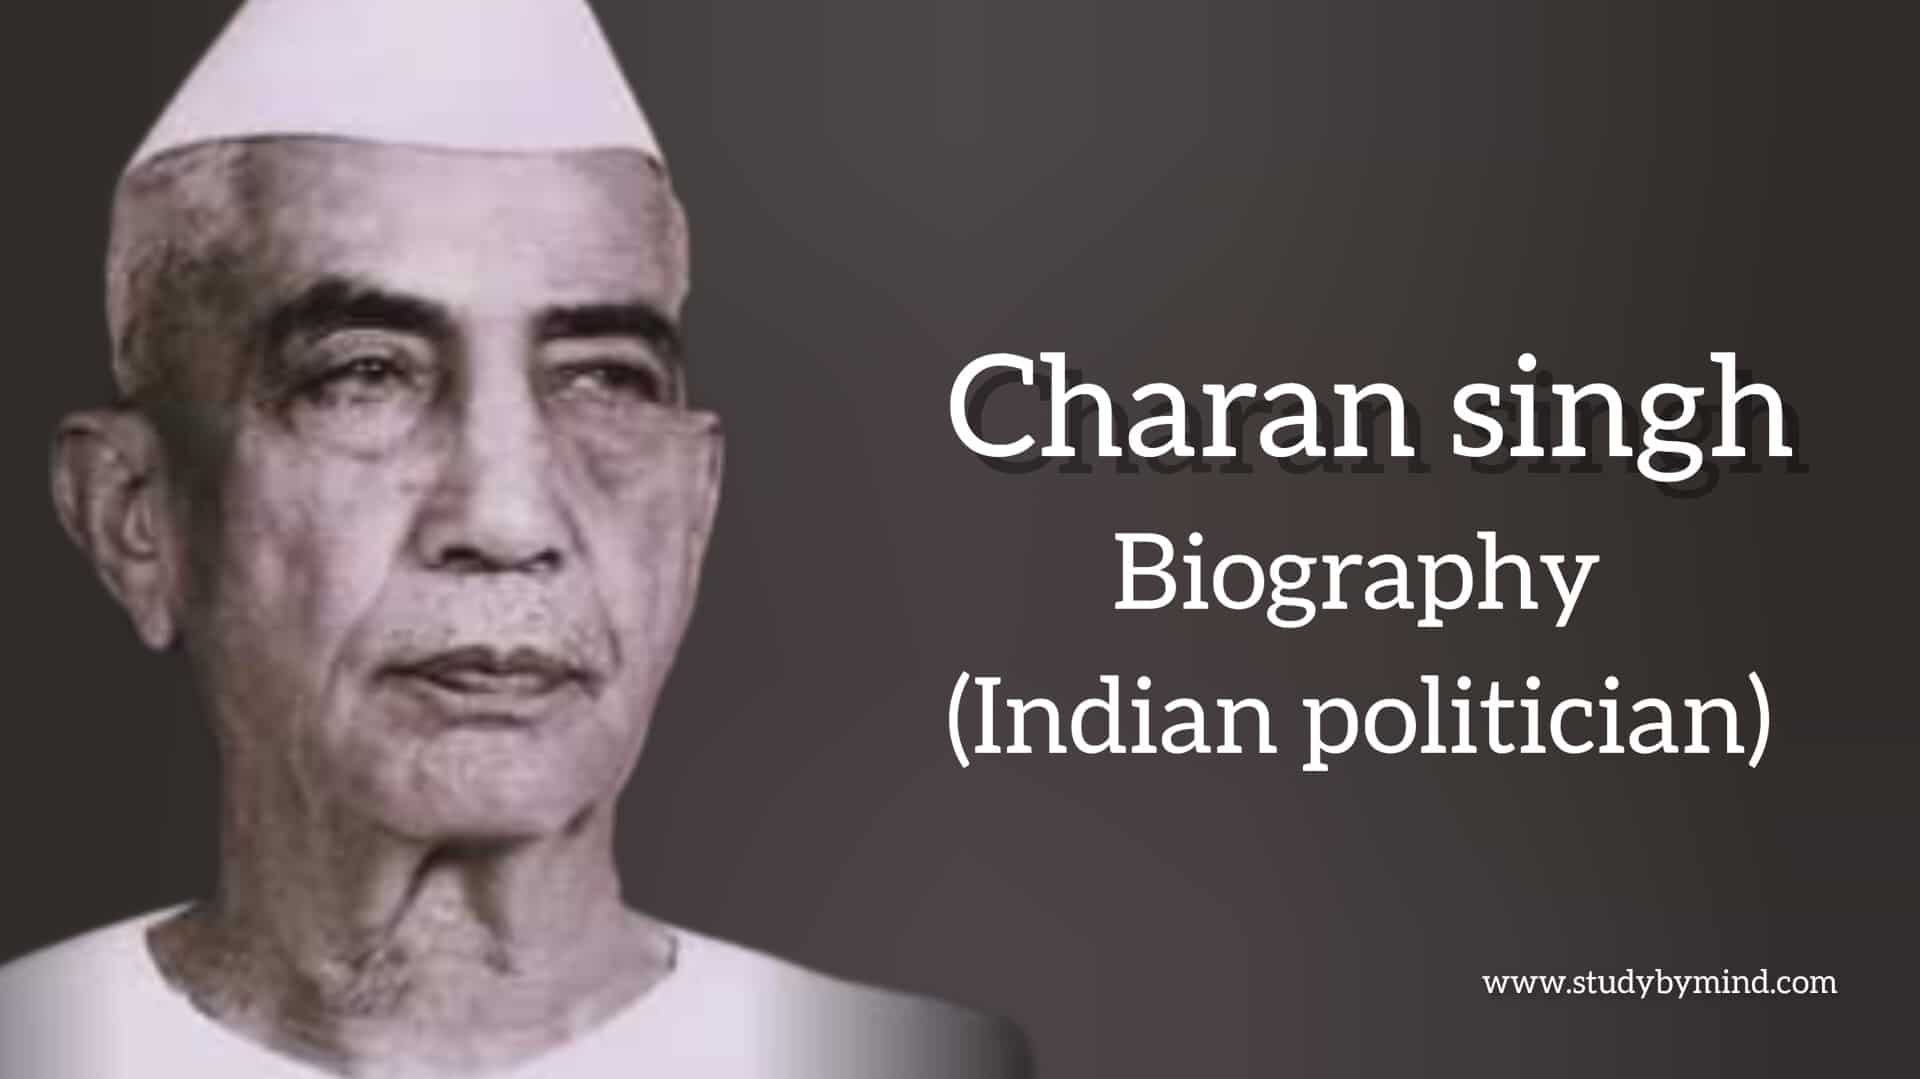 You are currently viewing Charan singh biography in english (Indian politician)